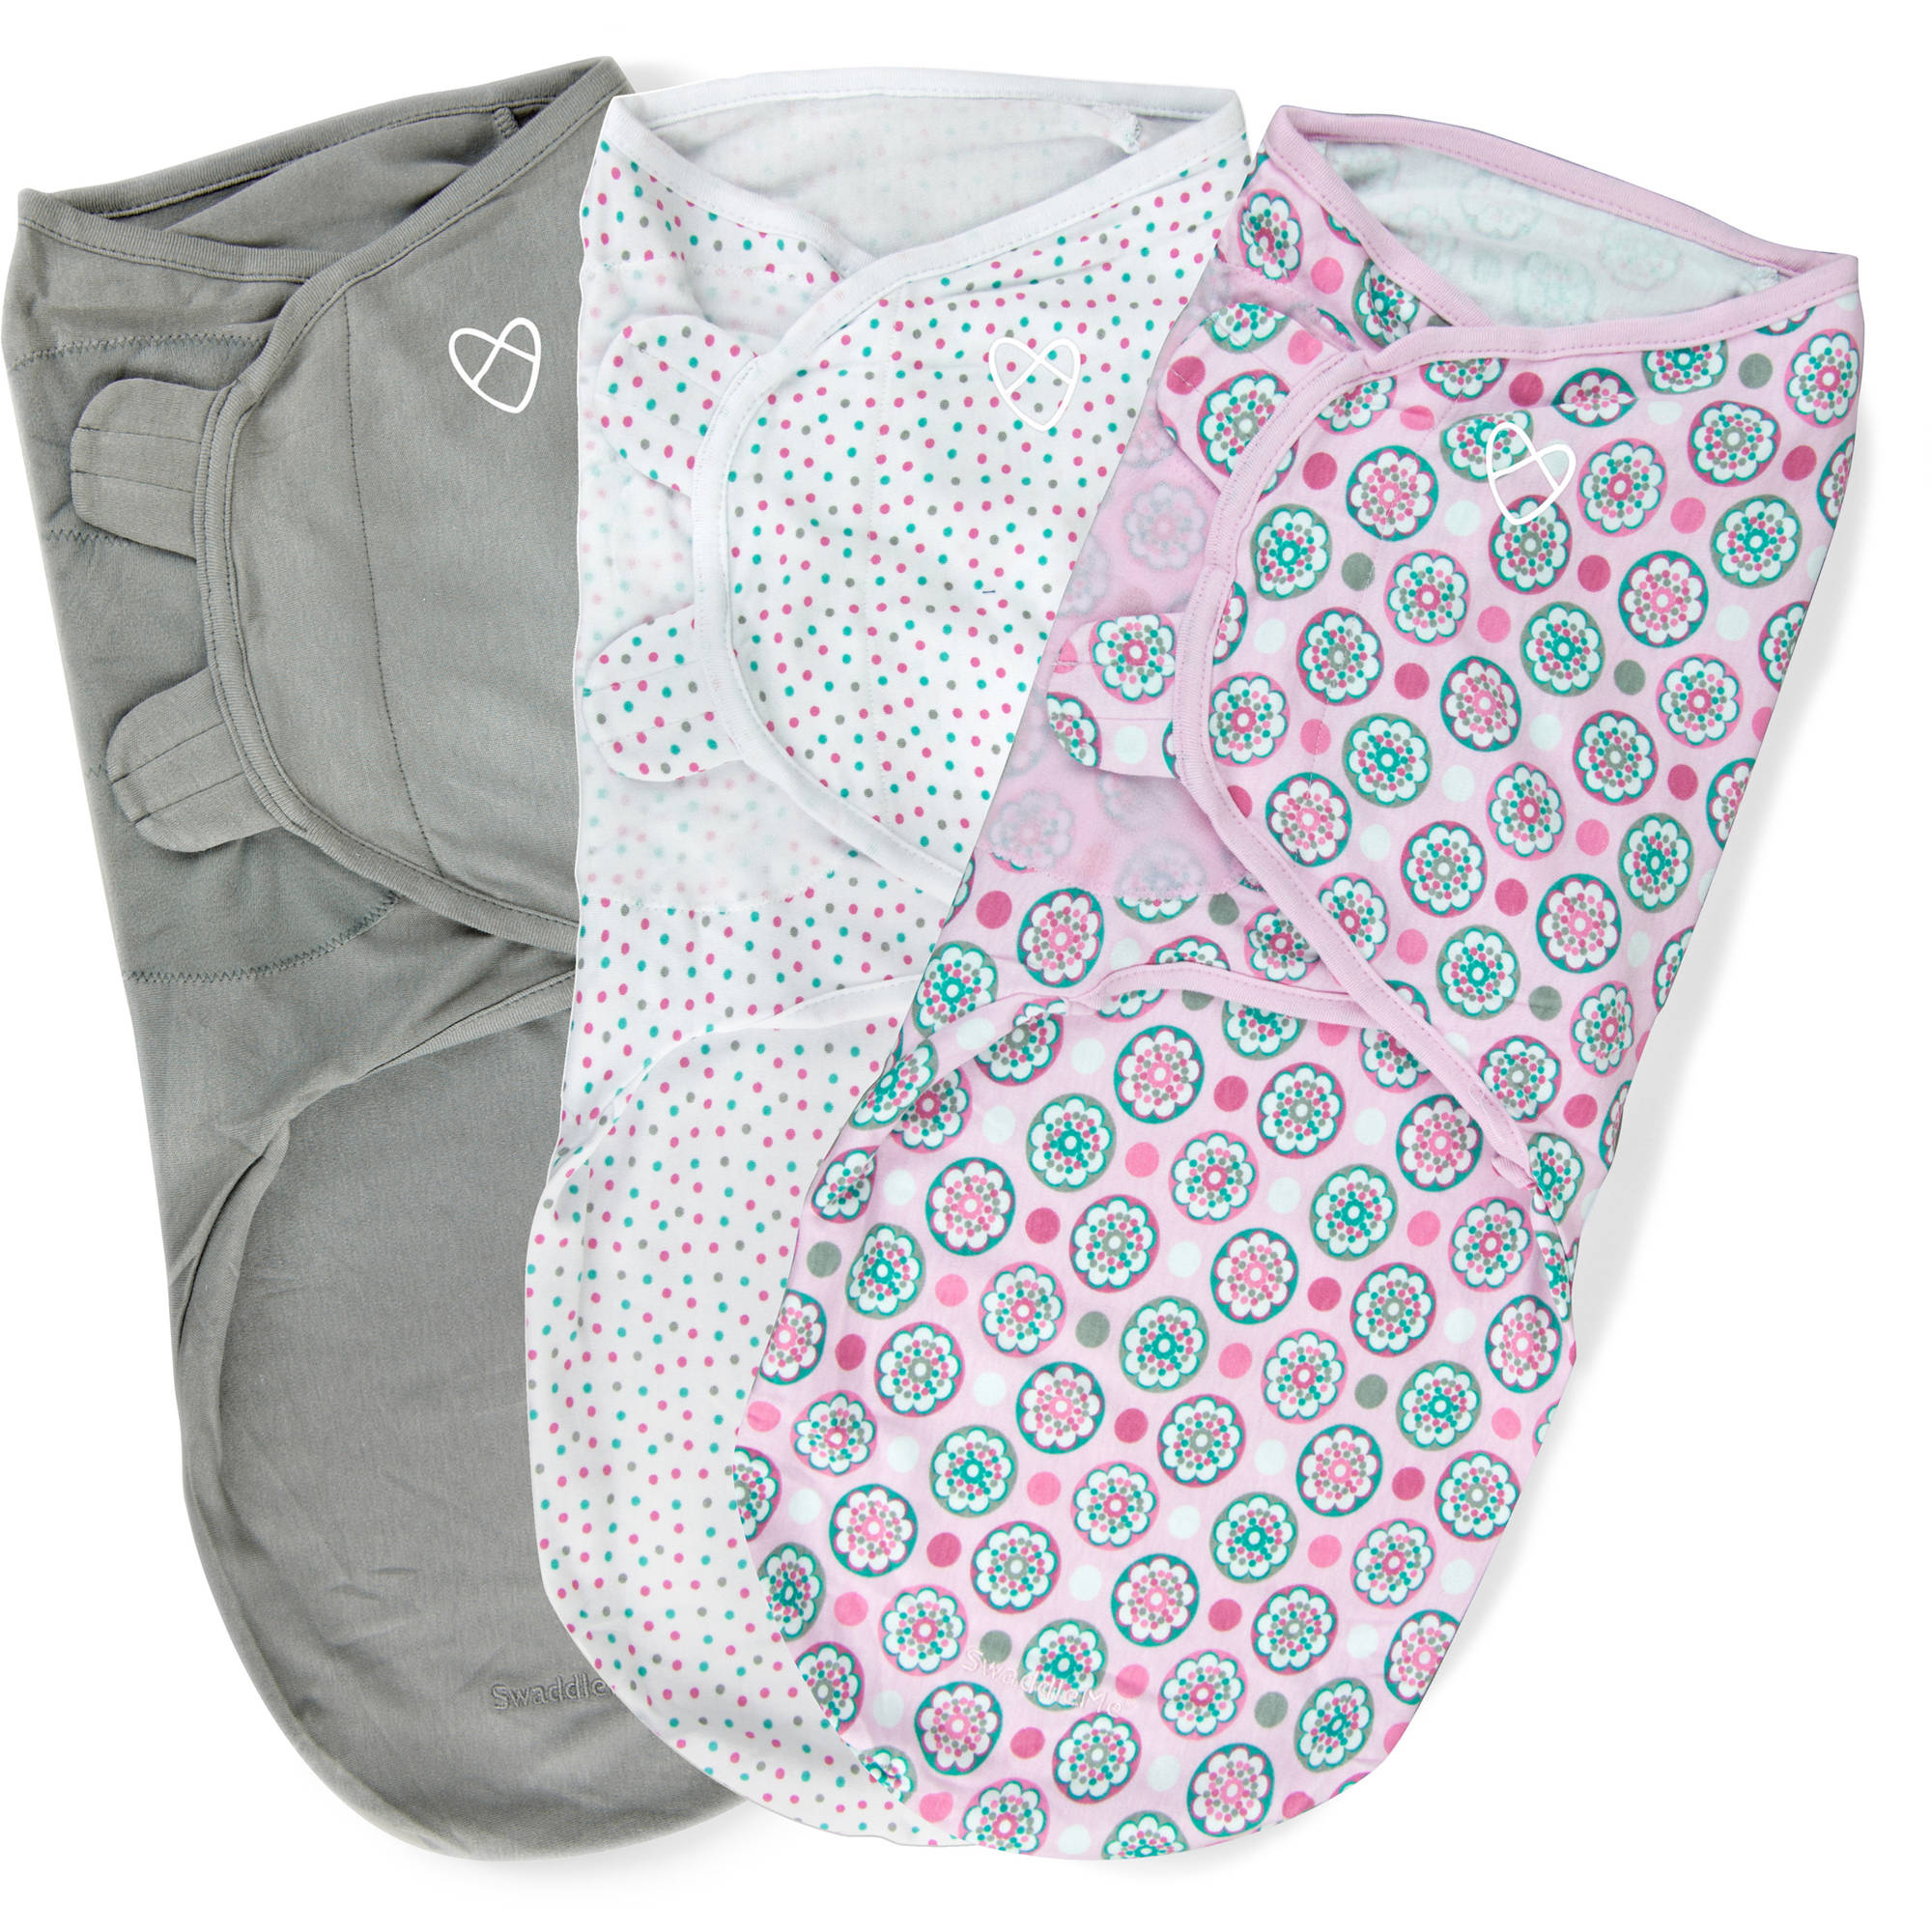 SUPER CUTE! Get 3 FREE Baby Swaddles ~ $16 Value ~ Exp 3/15/20 ...